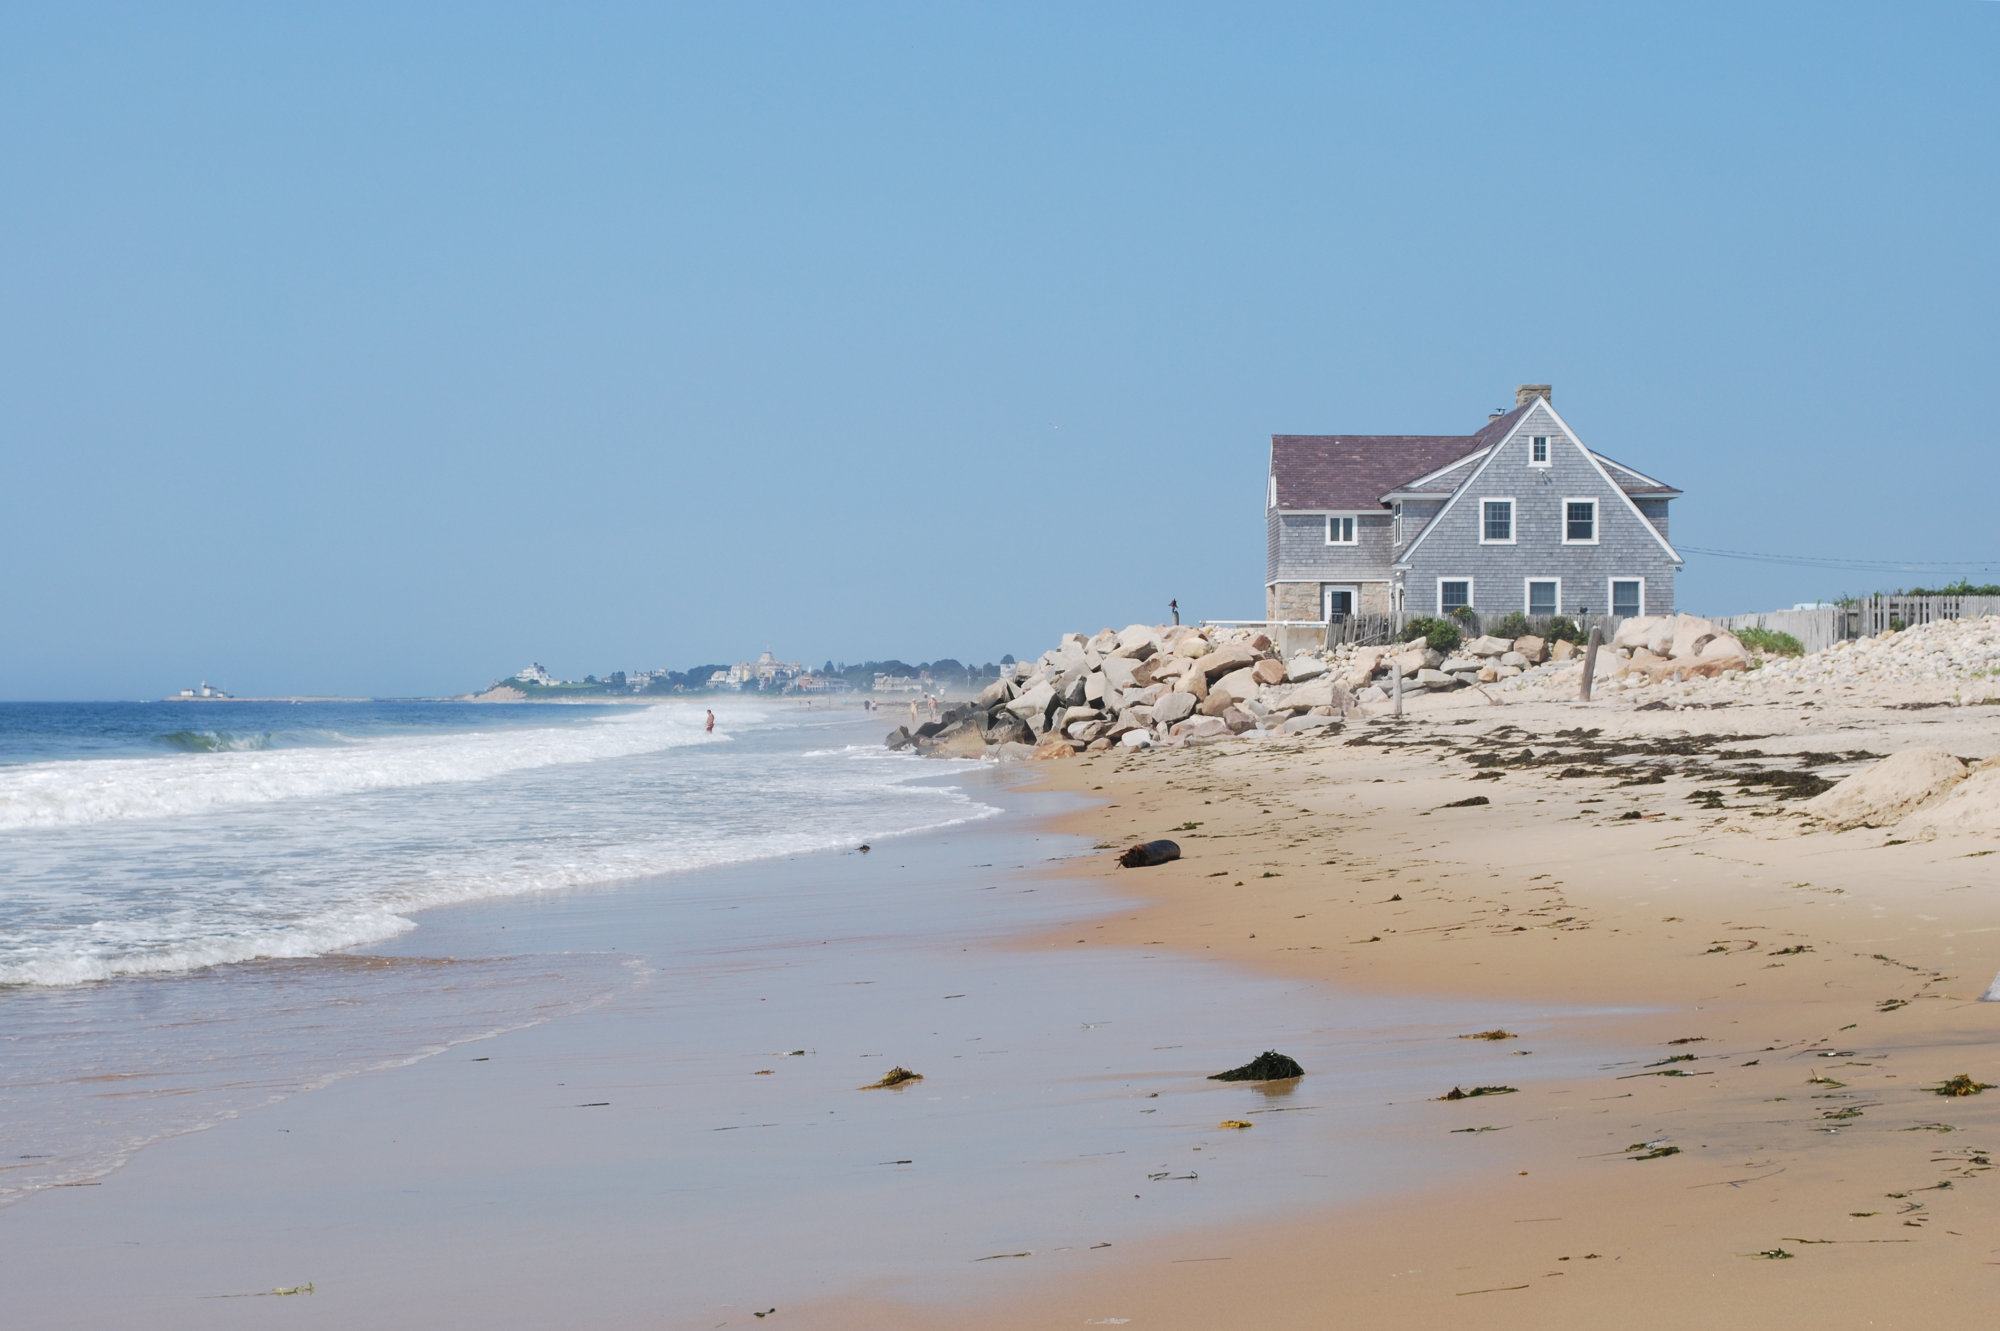 Photo of a house right along the beach.